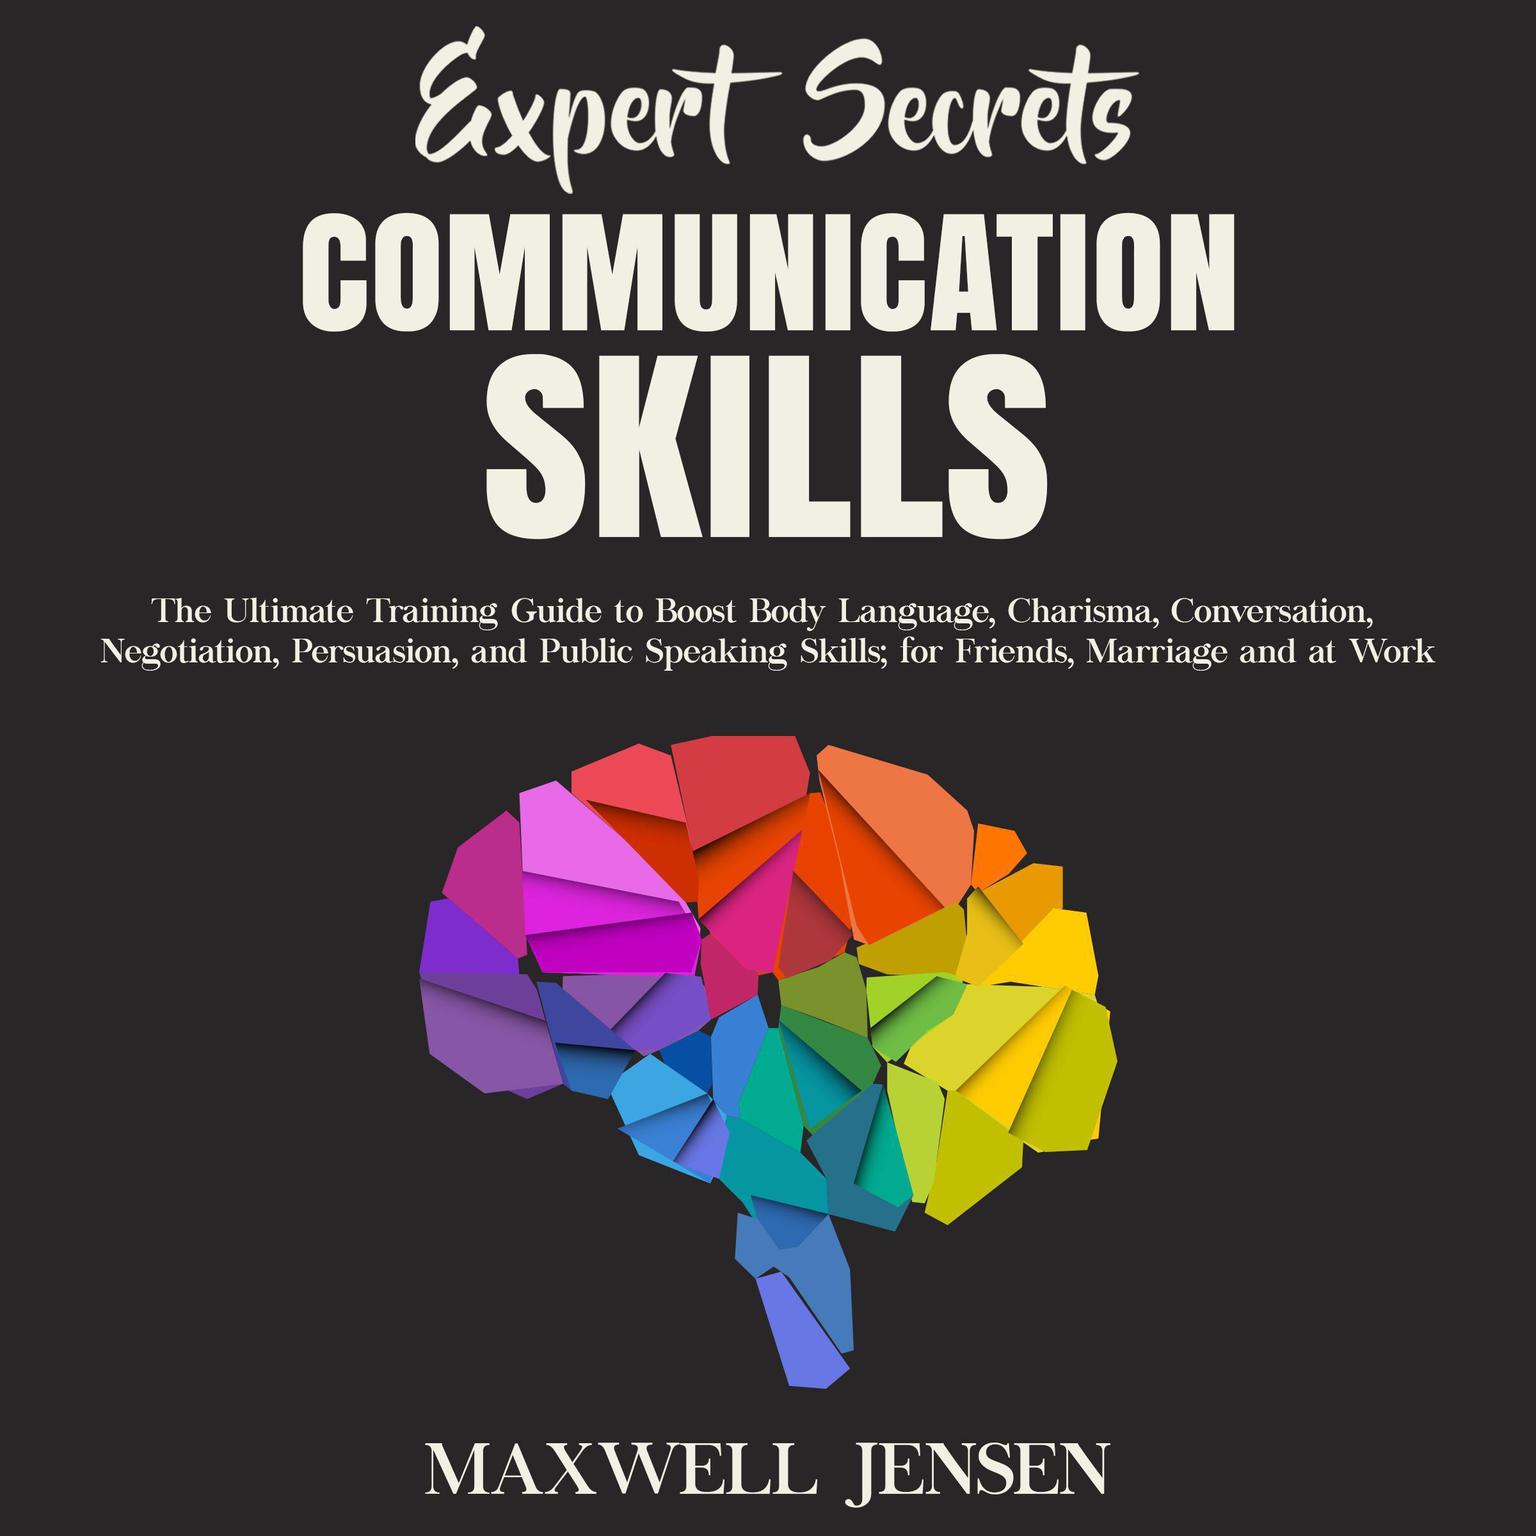 Expert Secrets – Communication Skills: The Ultimate Training Guide to Boost Body Language, Charisma, Conversation, Negotiation, Persuasion, and Public Speaking Skills; for Friends, Marriage and at Work Audiobook, by Maxwell Jensen